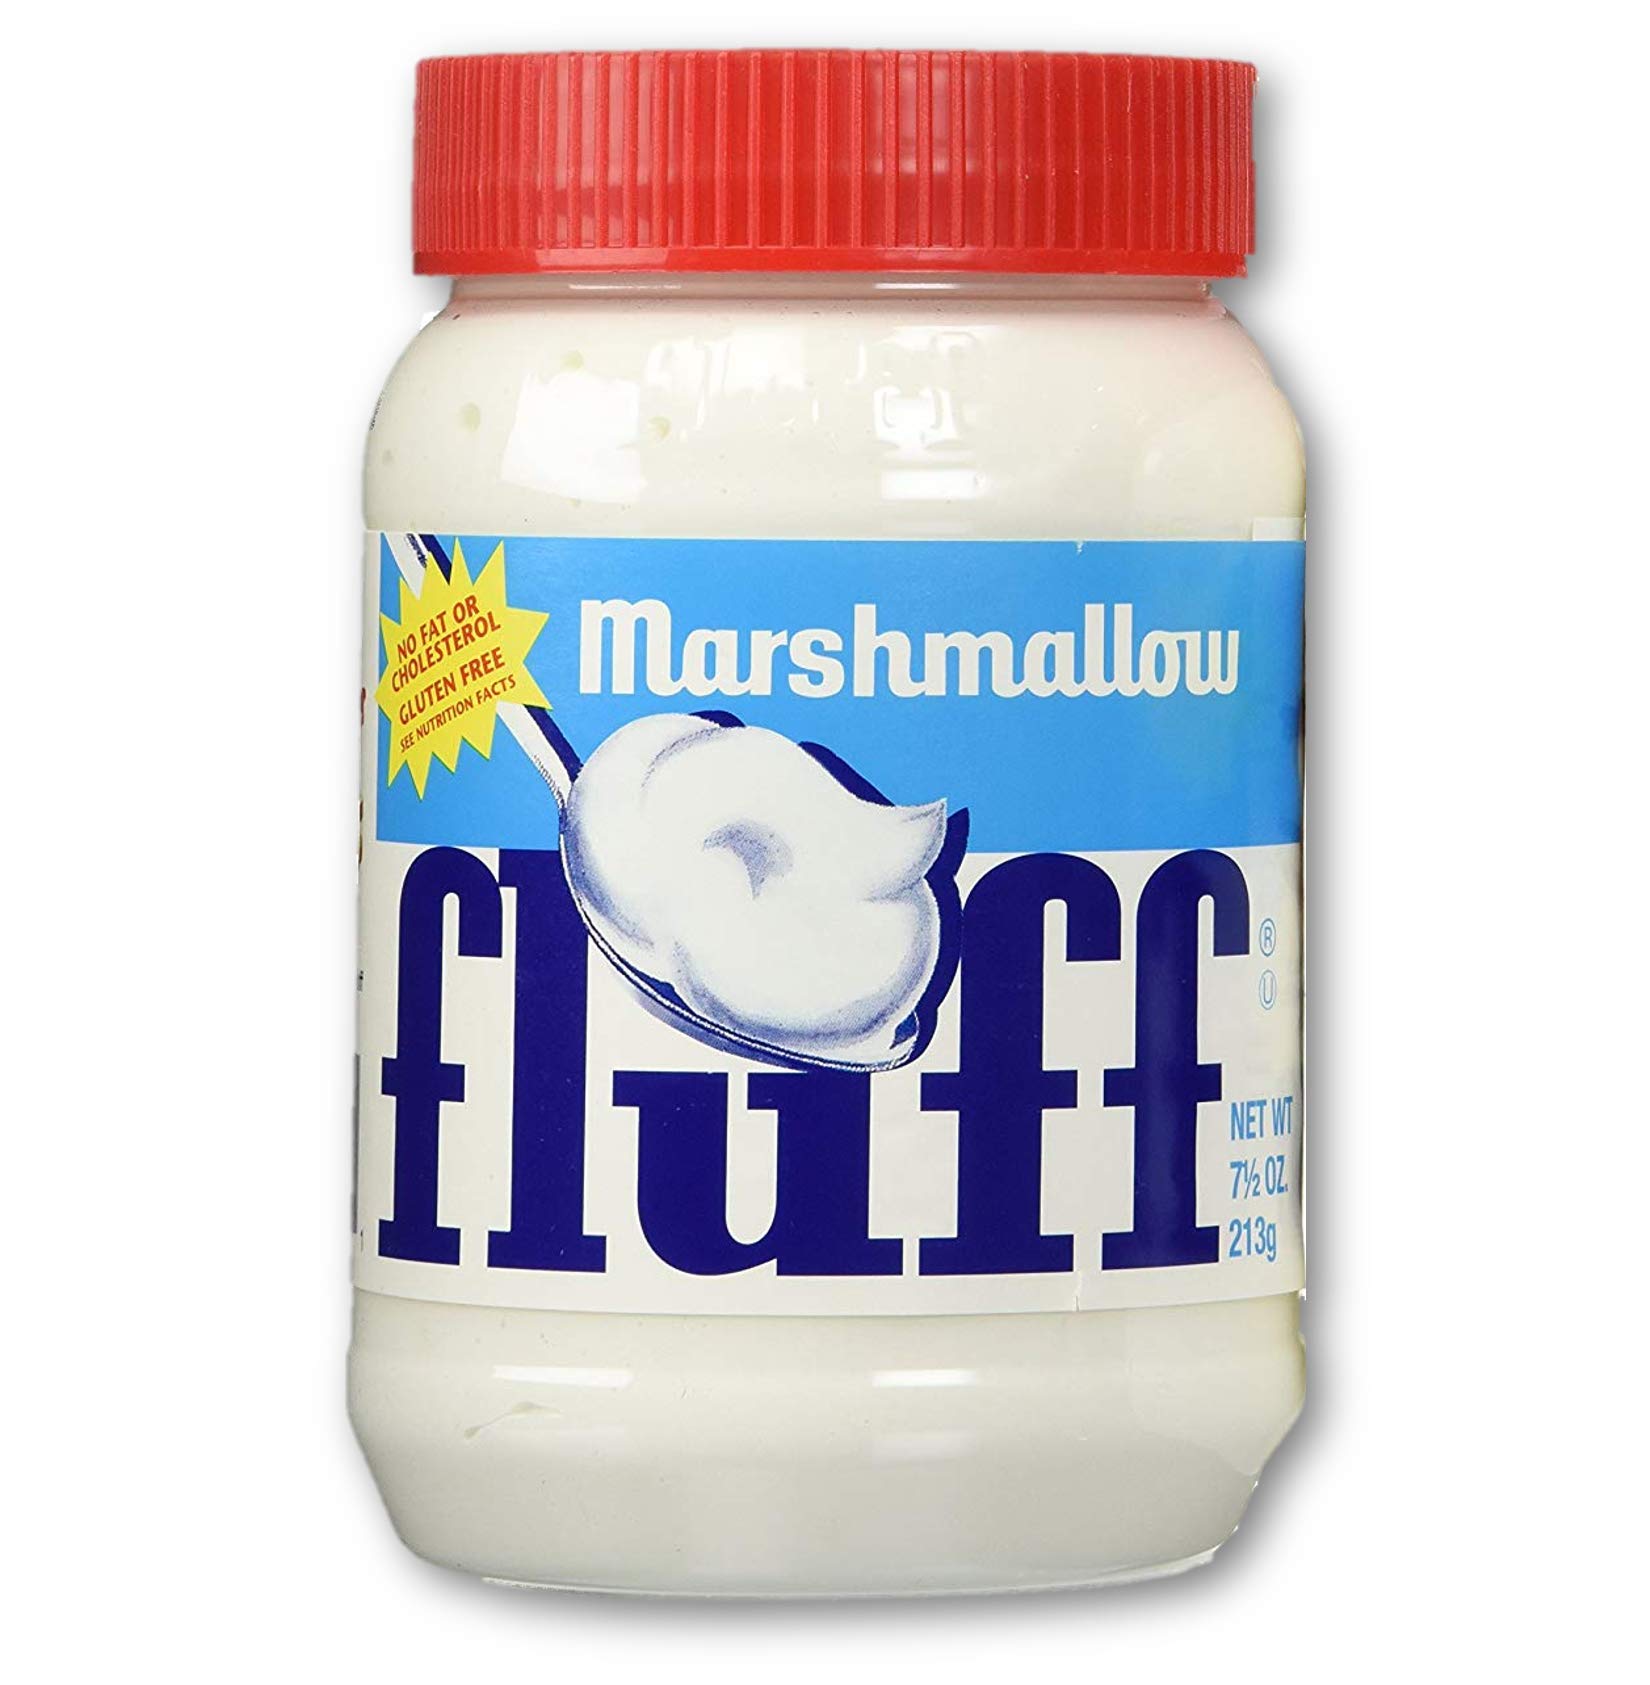 Marshmallow Fluff | Traditional Marshmallow Spread and Cr譥 | Gluten Free,  No Fat or Cholesterol (Regular - Classic, 7.5 Ounce (Pack of 1))